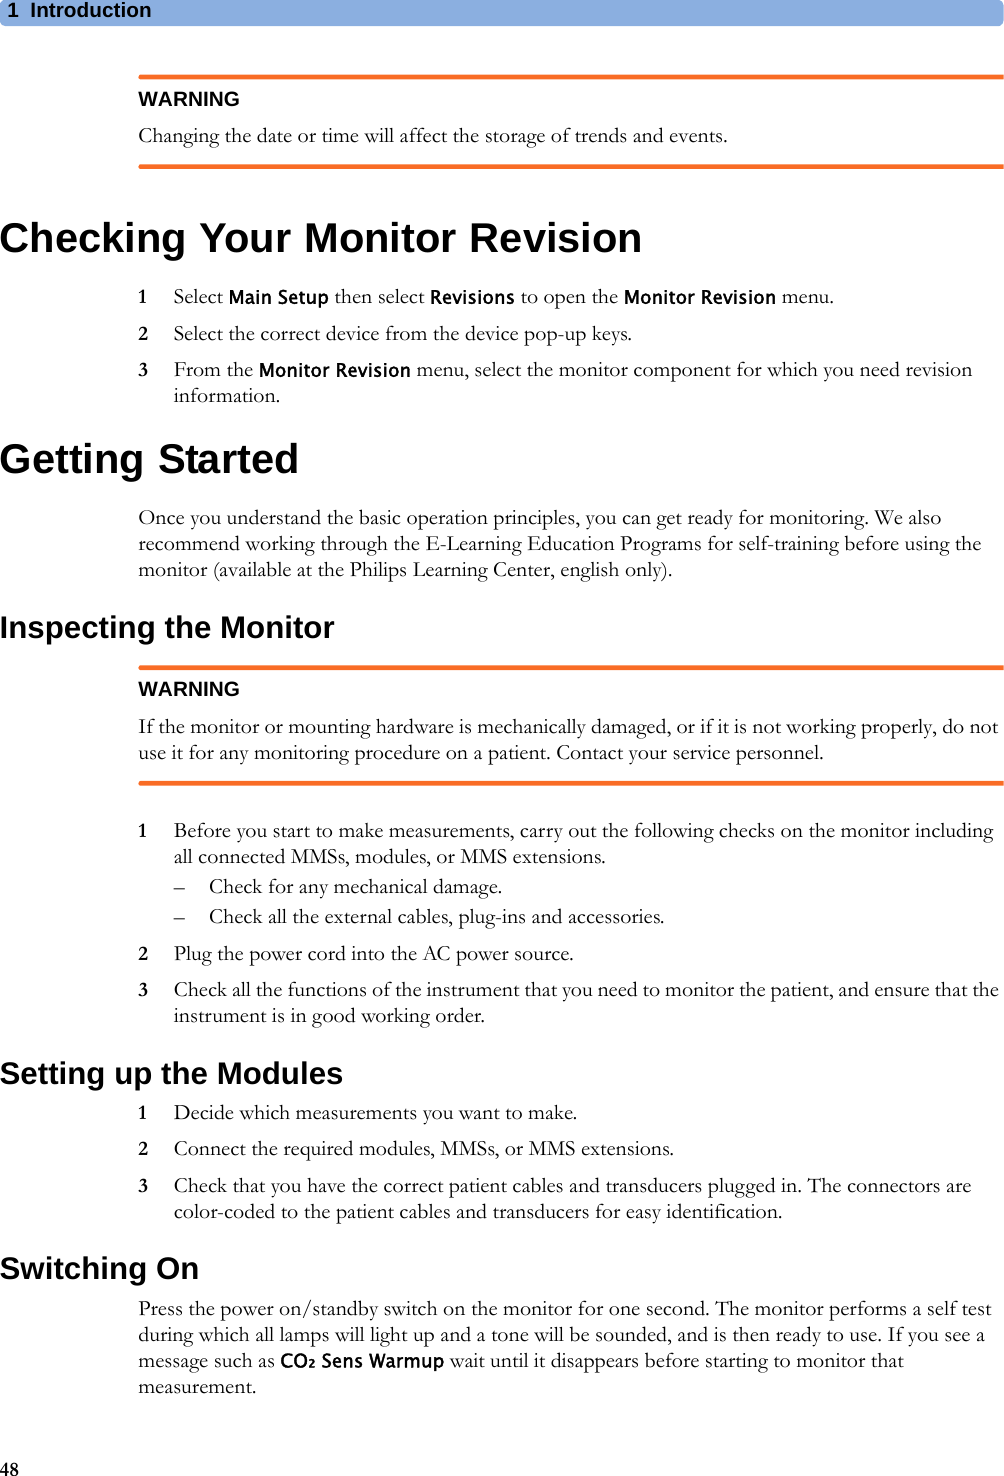 1Introduction48WARNINGChanging the date or time will affect the storage of trends and events.Checking Your Monitor Revision1Select Main Setup then select Revisions to open the Monitor Revision menu.2Select the correct device from the device pop-up keys.3From the Monitor Revision menu, select the monitor component for which you need revision information.Getting StartedOnce you understand the basic operation principles, you can get ready for monitoring. We also recommend working through the E-Learning Education Programs for self-training before using the monitor (available at the Philips Learning Center, english only).Inspecting the MonitorWARNINGIf the monitor or mounting hardware is mechanically damaged, or if it is not working properly, do not use it for any monitoring procedure on a patient. Contact your service personnel.1Before you start to make measurements, carry out the following checks on the monitor including all connected MMSs, modules, or MMS extensions.– Check for any mechanical damage.– Check all the external cables, plug-ins and accessories.2Plug the power cord into the AC power source. 3Check all the functions of the instrument that you need to monitor the patient, and ensure that the instrument is in good working order.Setting up the Modules1Decide which measurements you want to make.2Connect the required modules, MMSs, or MMS extensions.3Check that you have the correct patient cables and transducers plugged in. The connectors are color-coded to the patient cables and transducers for easy identification.Switching OnPress the power on/standby switch on the monitor for one second. The monitor performs a self test during which all lamps will light up and a tone will be sounded, and is then ready to use. If you see a message such as CO₂ Sens Warmup wait until it disappears before starting to monitor that measurement.